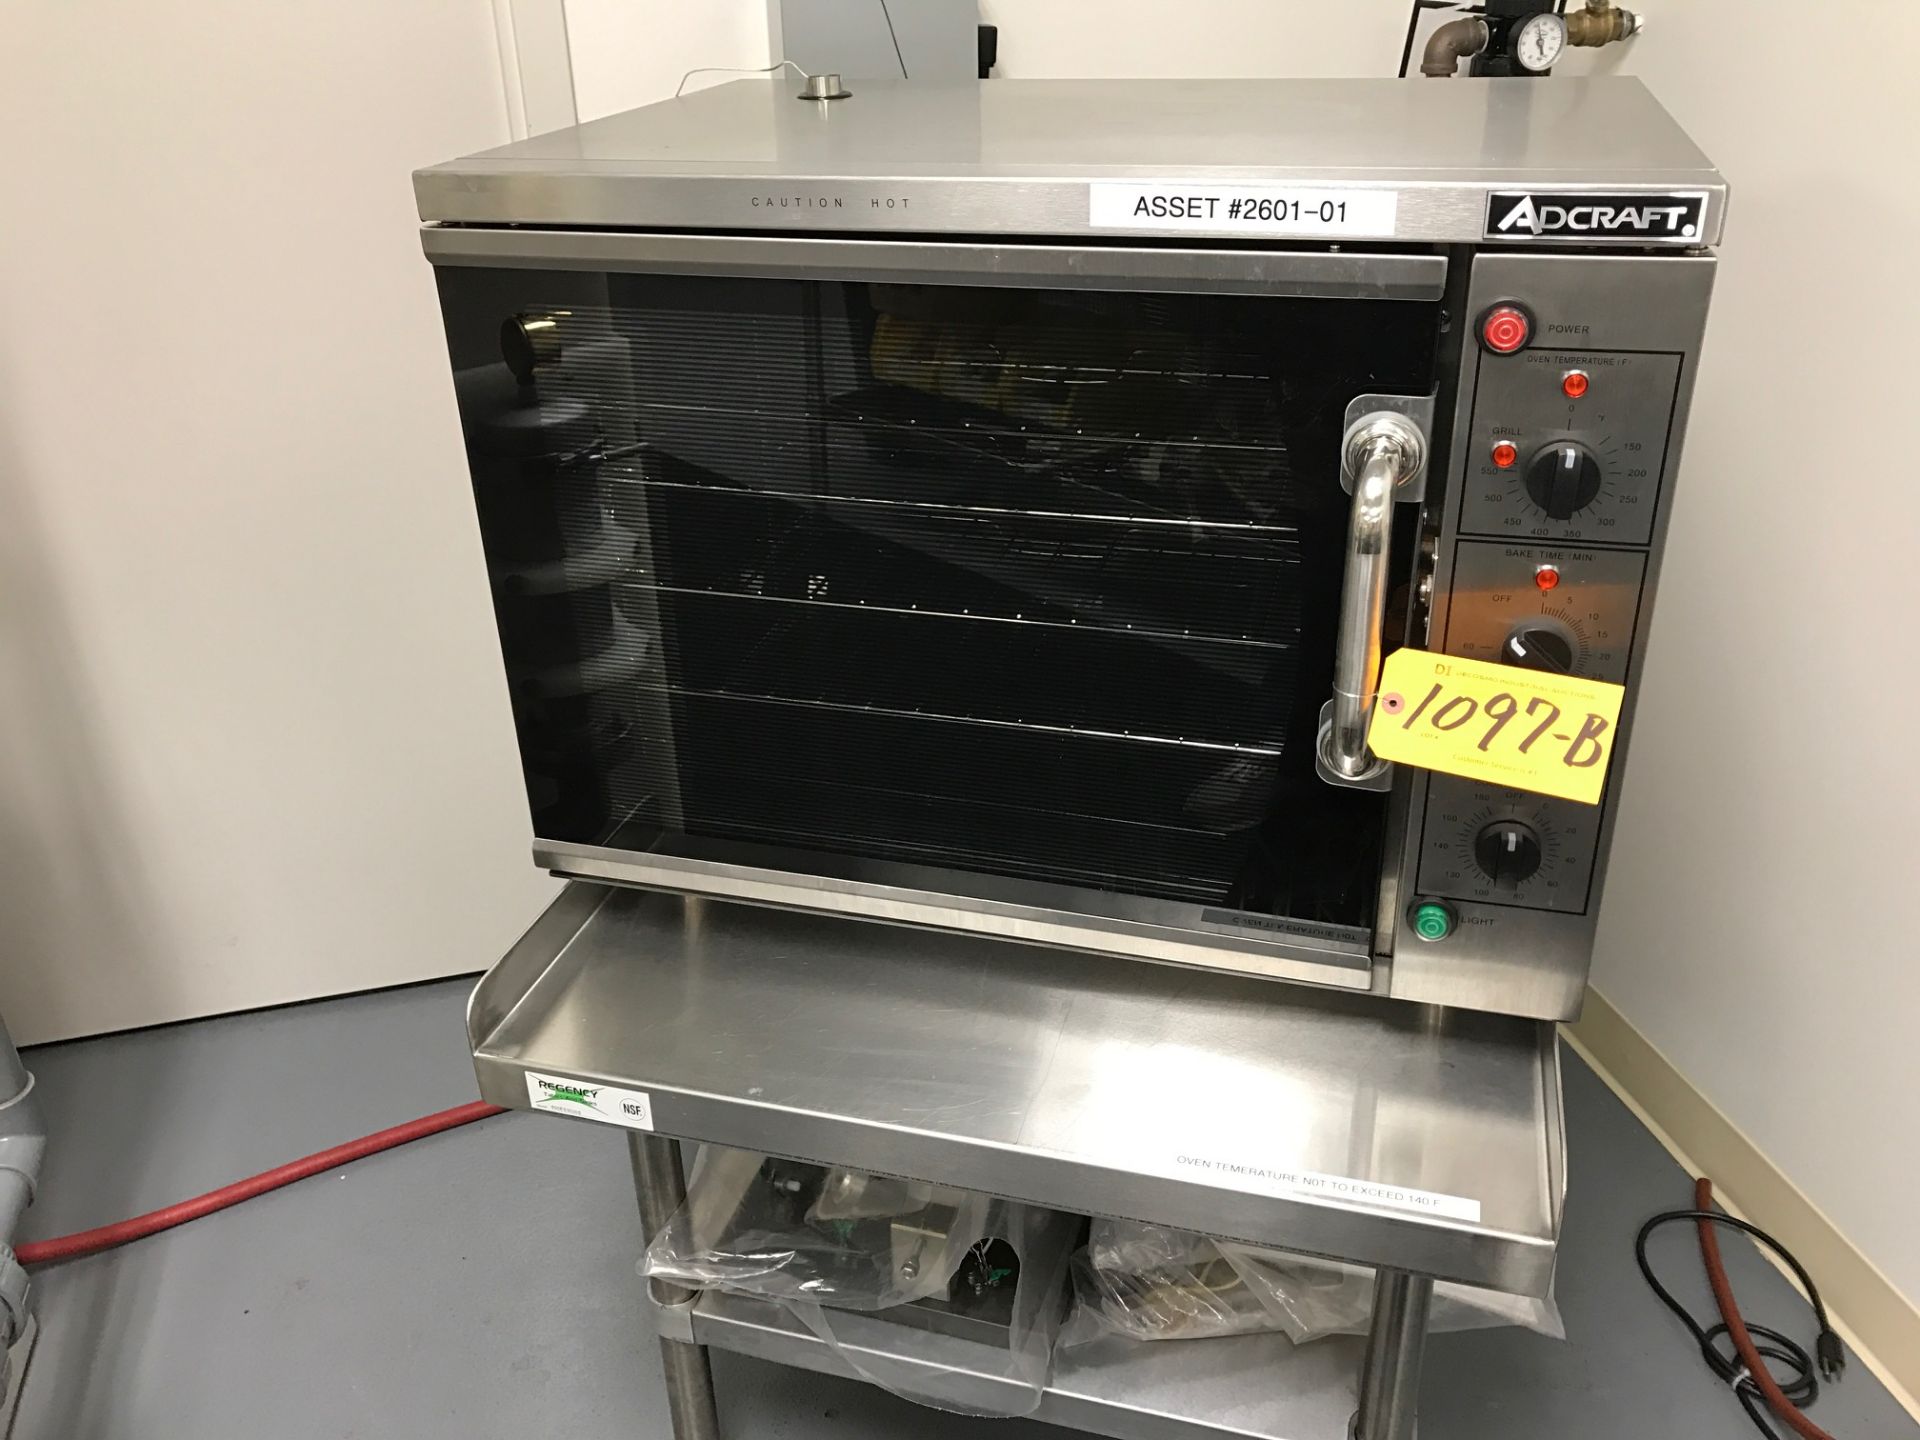 ADCRAFT # COH-3100WPRO CONVECTION OVEN (3100 WATTS) WITH REGENCY STAINLESS STEEL WORK TABLE (NEW